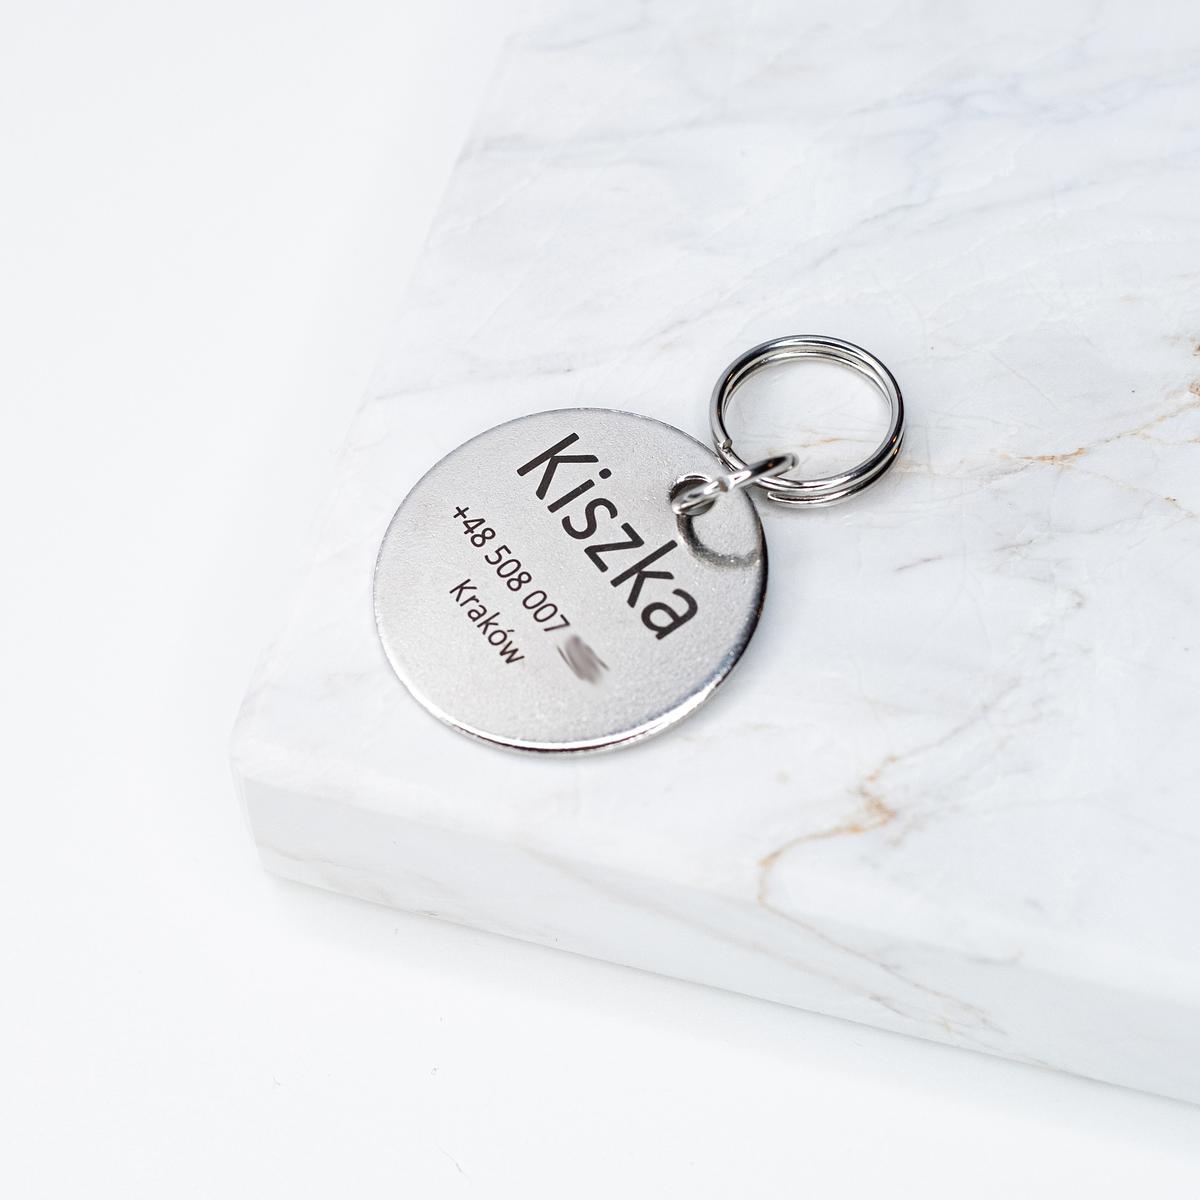 Stainless steel ID tag